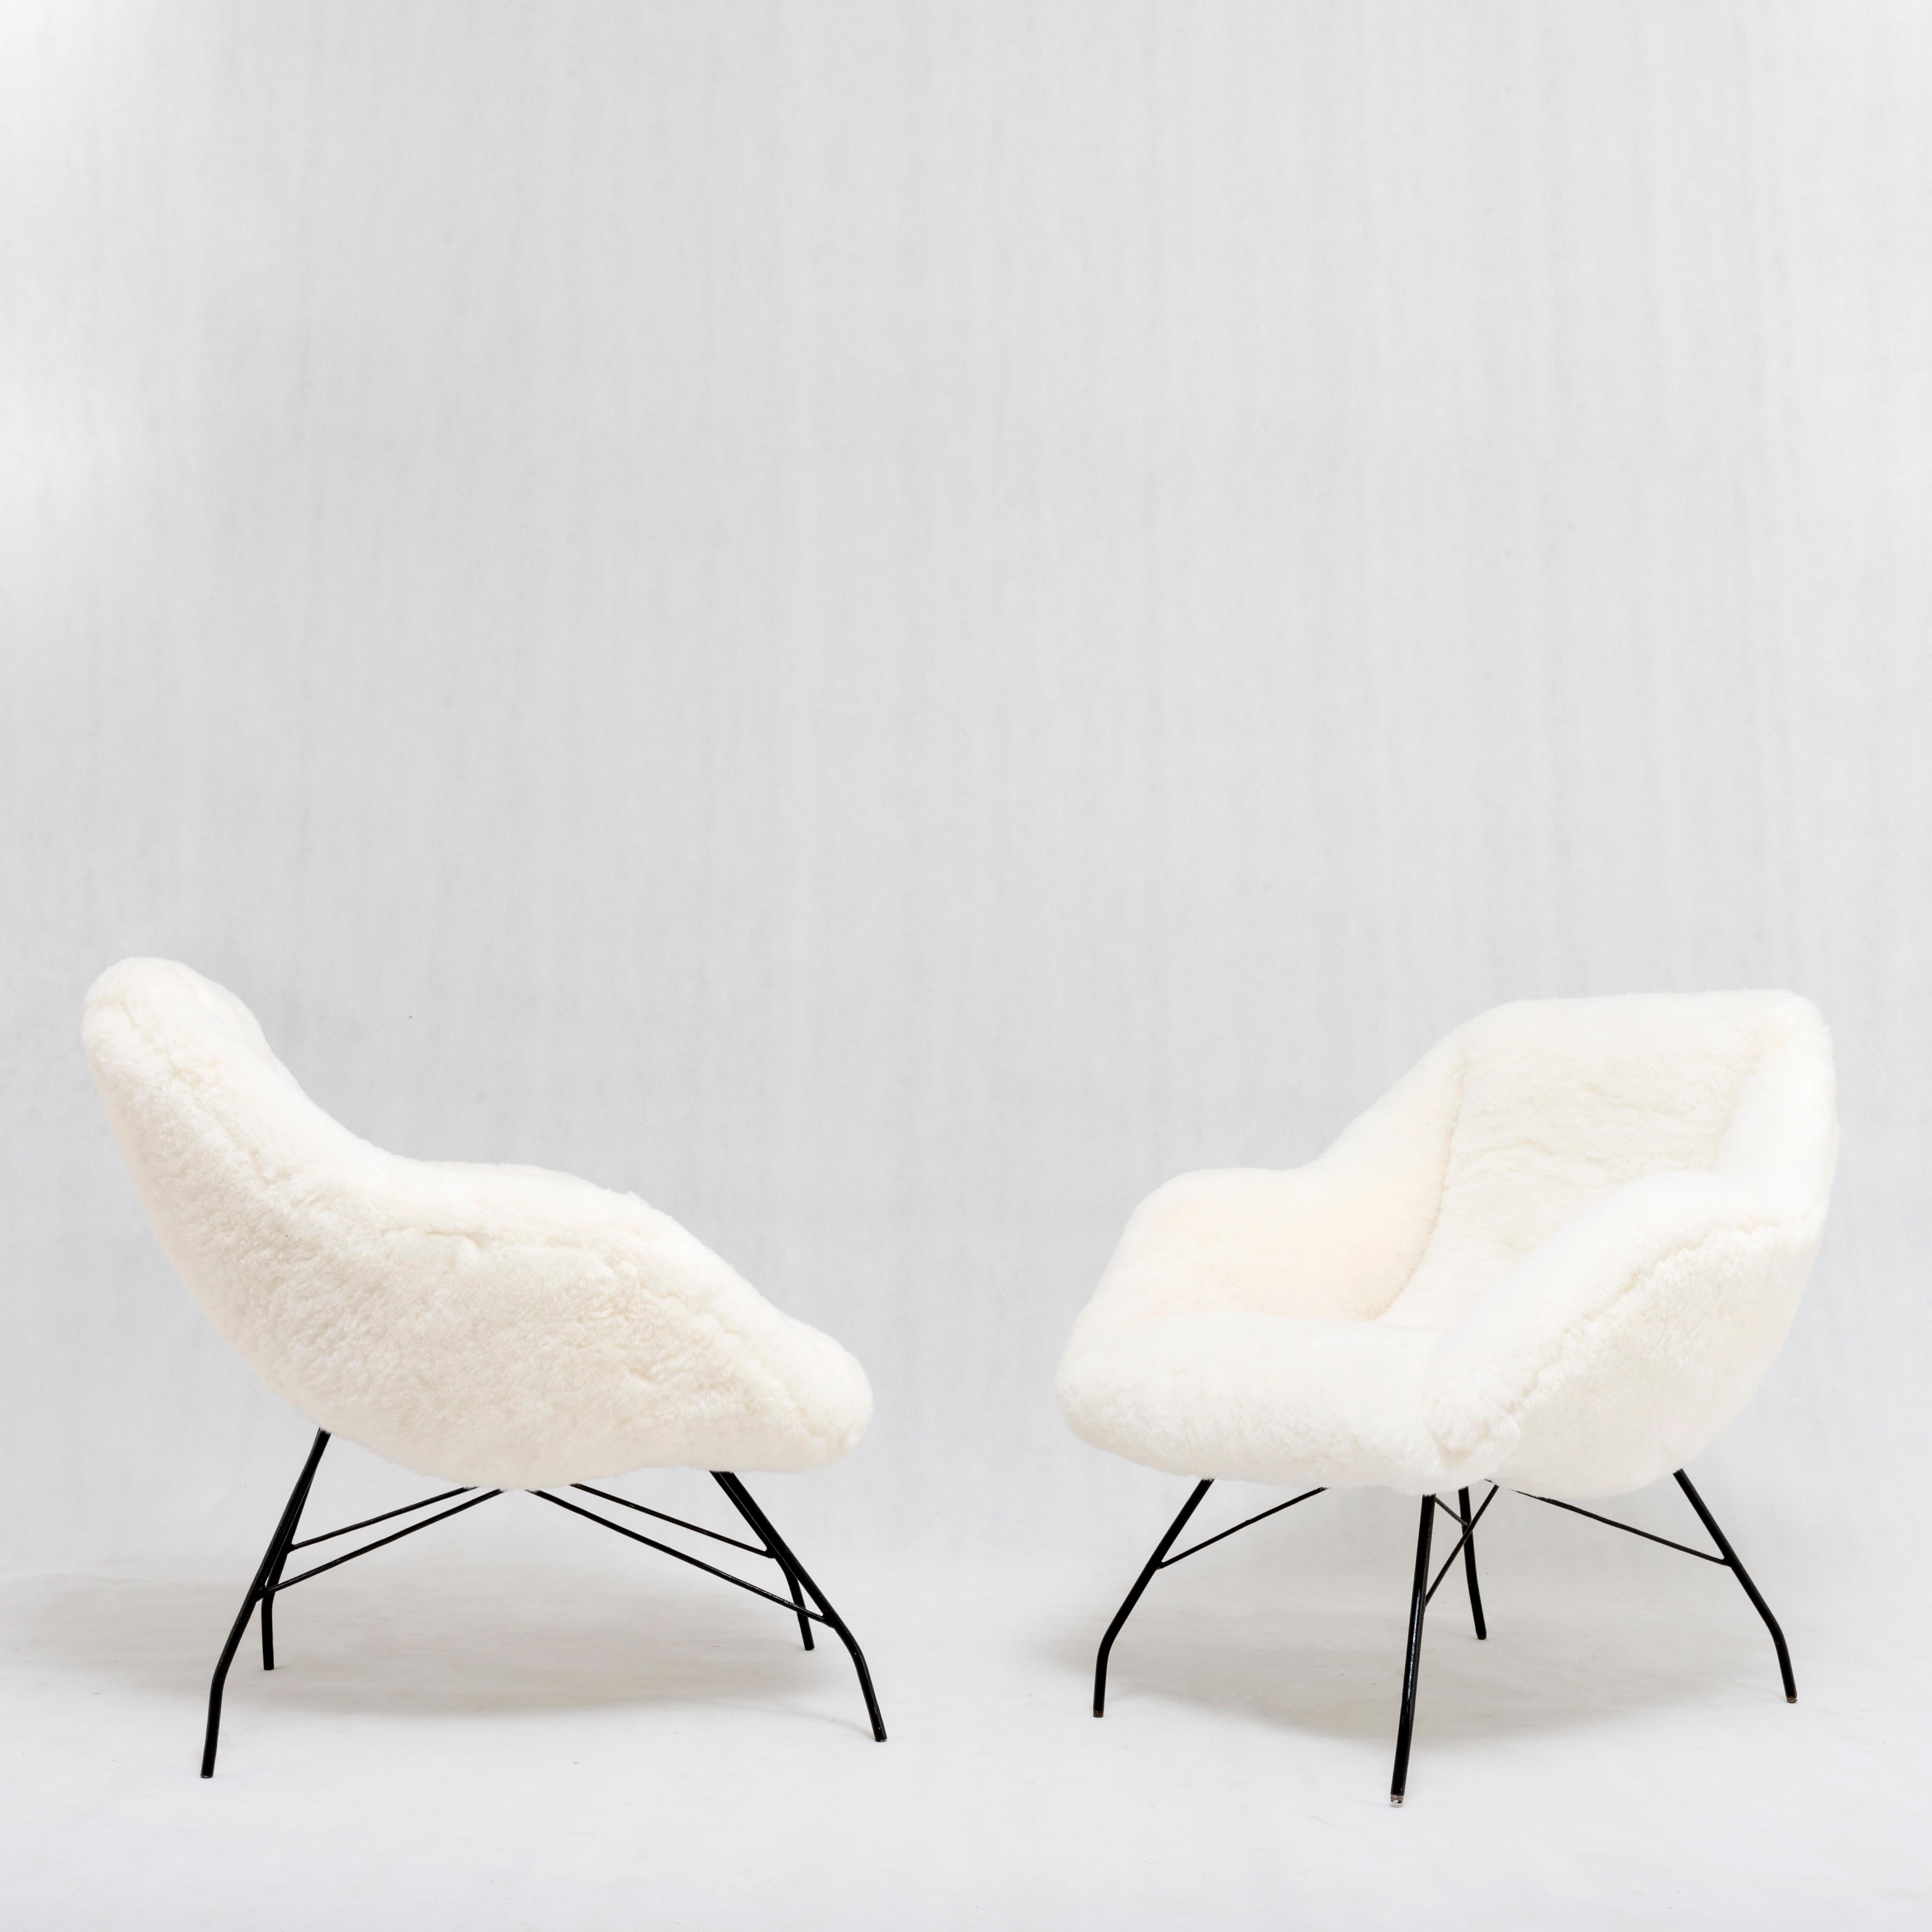 Pair of midcentury armchairs by Carlo Hauner and Martin Eisler
Manufactured in Brazil in the 1950s by Forma Moveis
Reupholstered in sheepskin

Literature:
Movel Brasileiro Moderno - FGV Projetos, Aeroplana Editora, Sao Paulo, 2011 (p